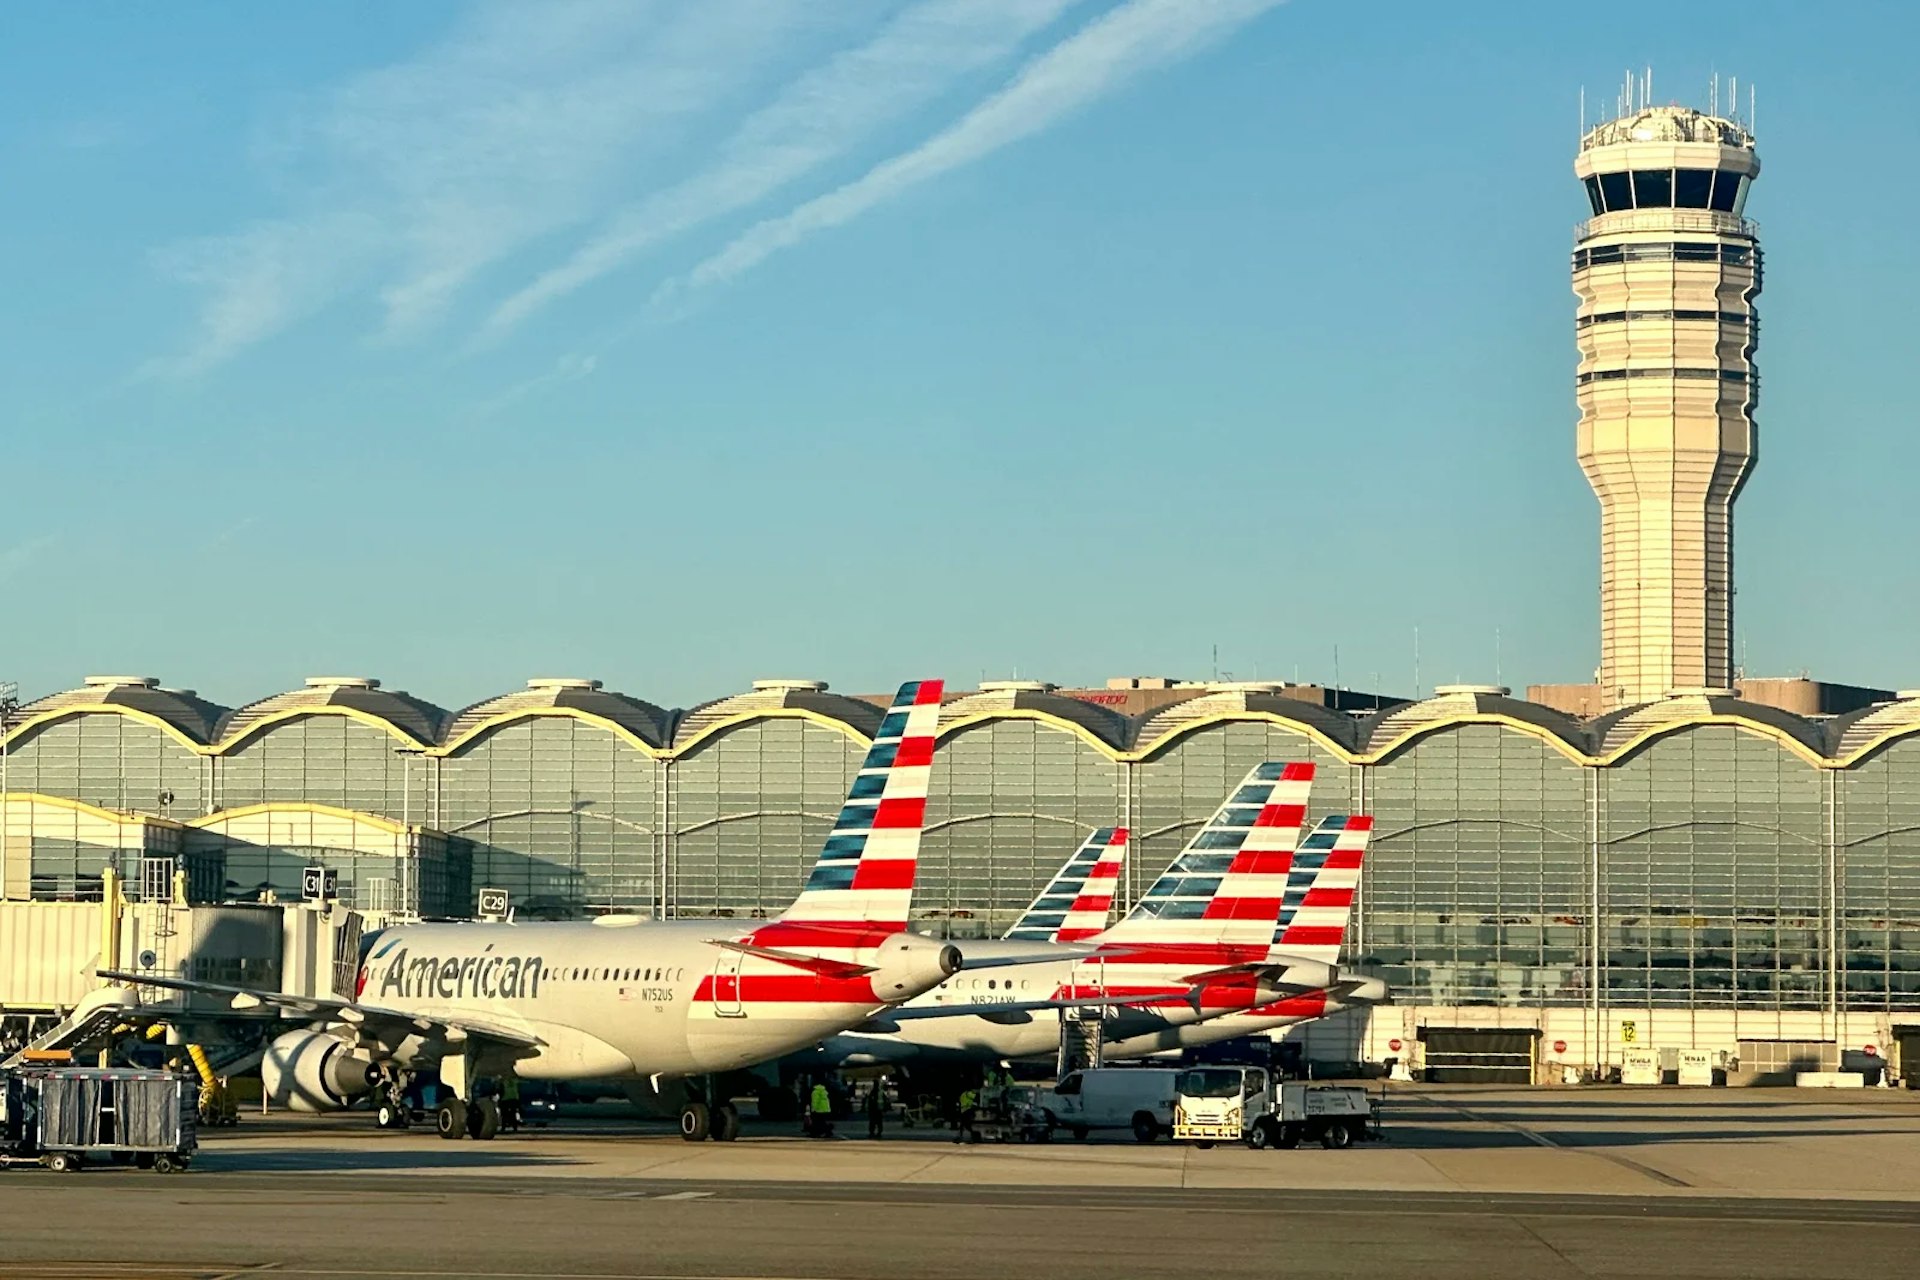 The American Airlines fleet